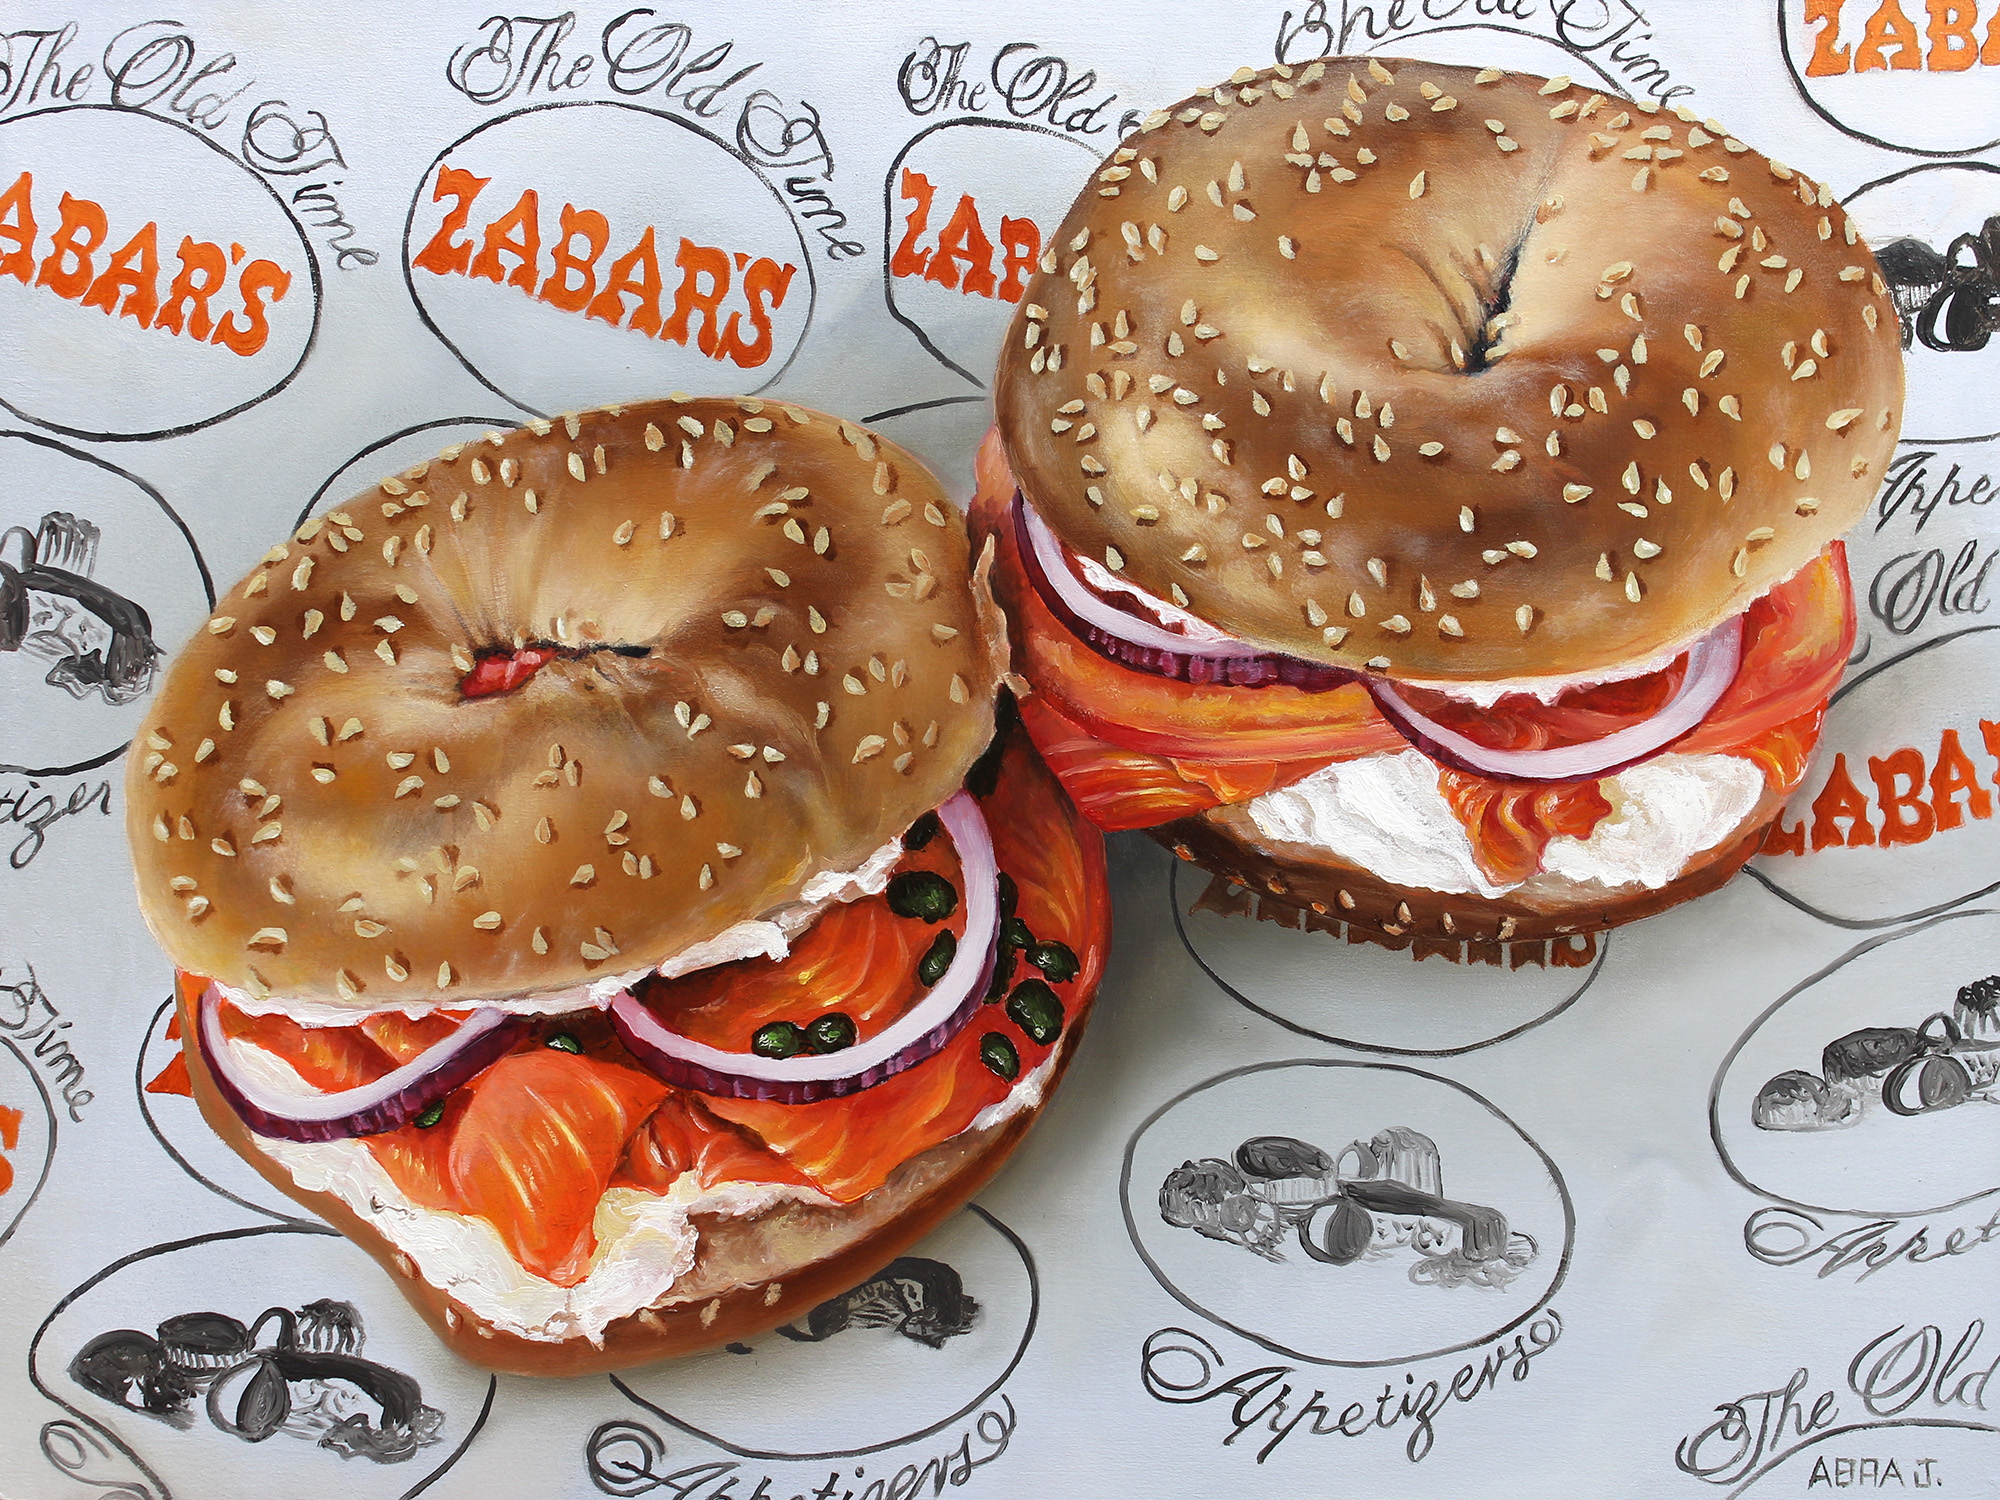 "Zabar's Bagel and Lox - Commission" 11x14 Original Oil Painting by Abra Johnson